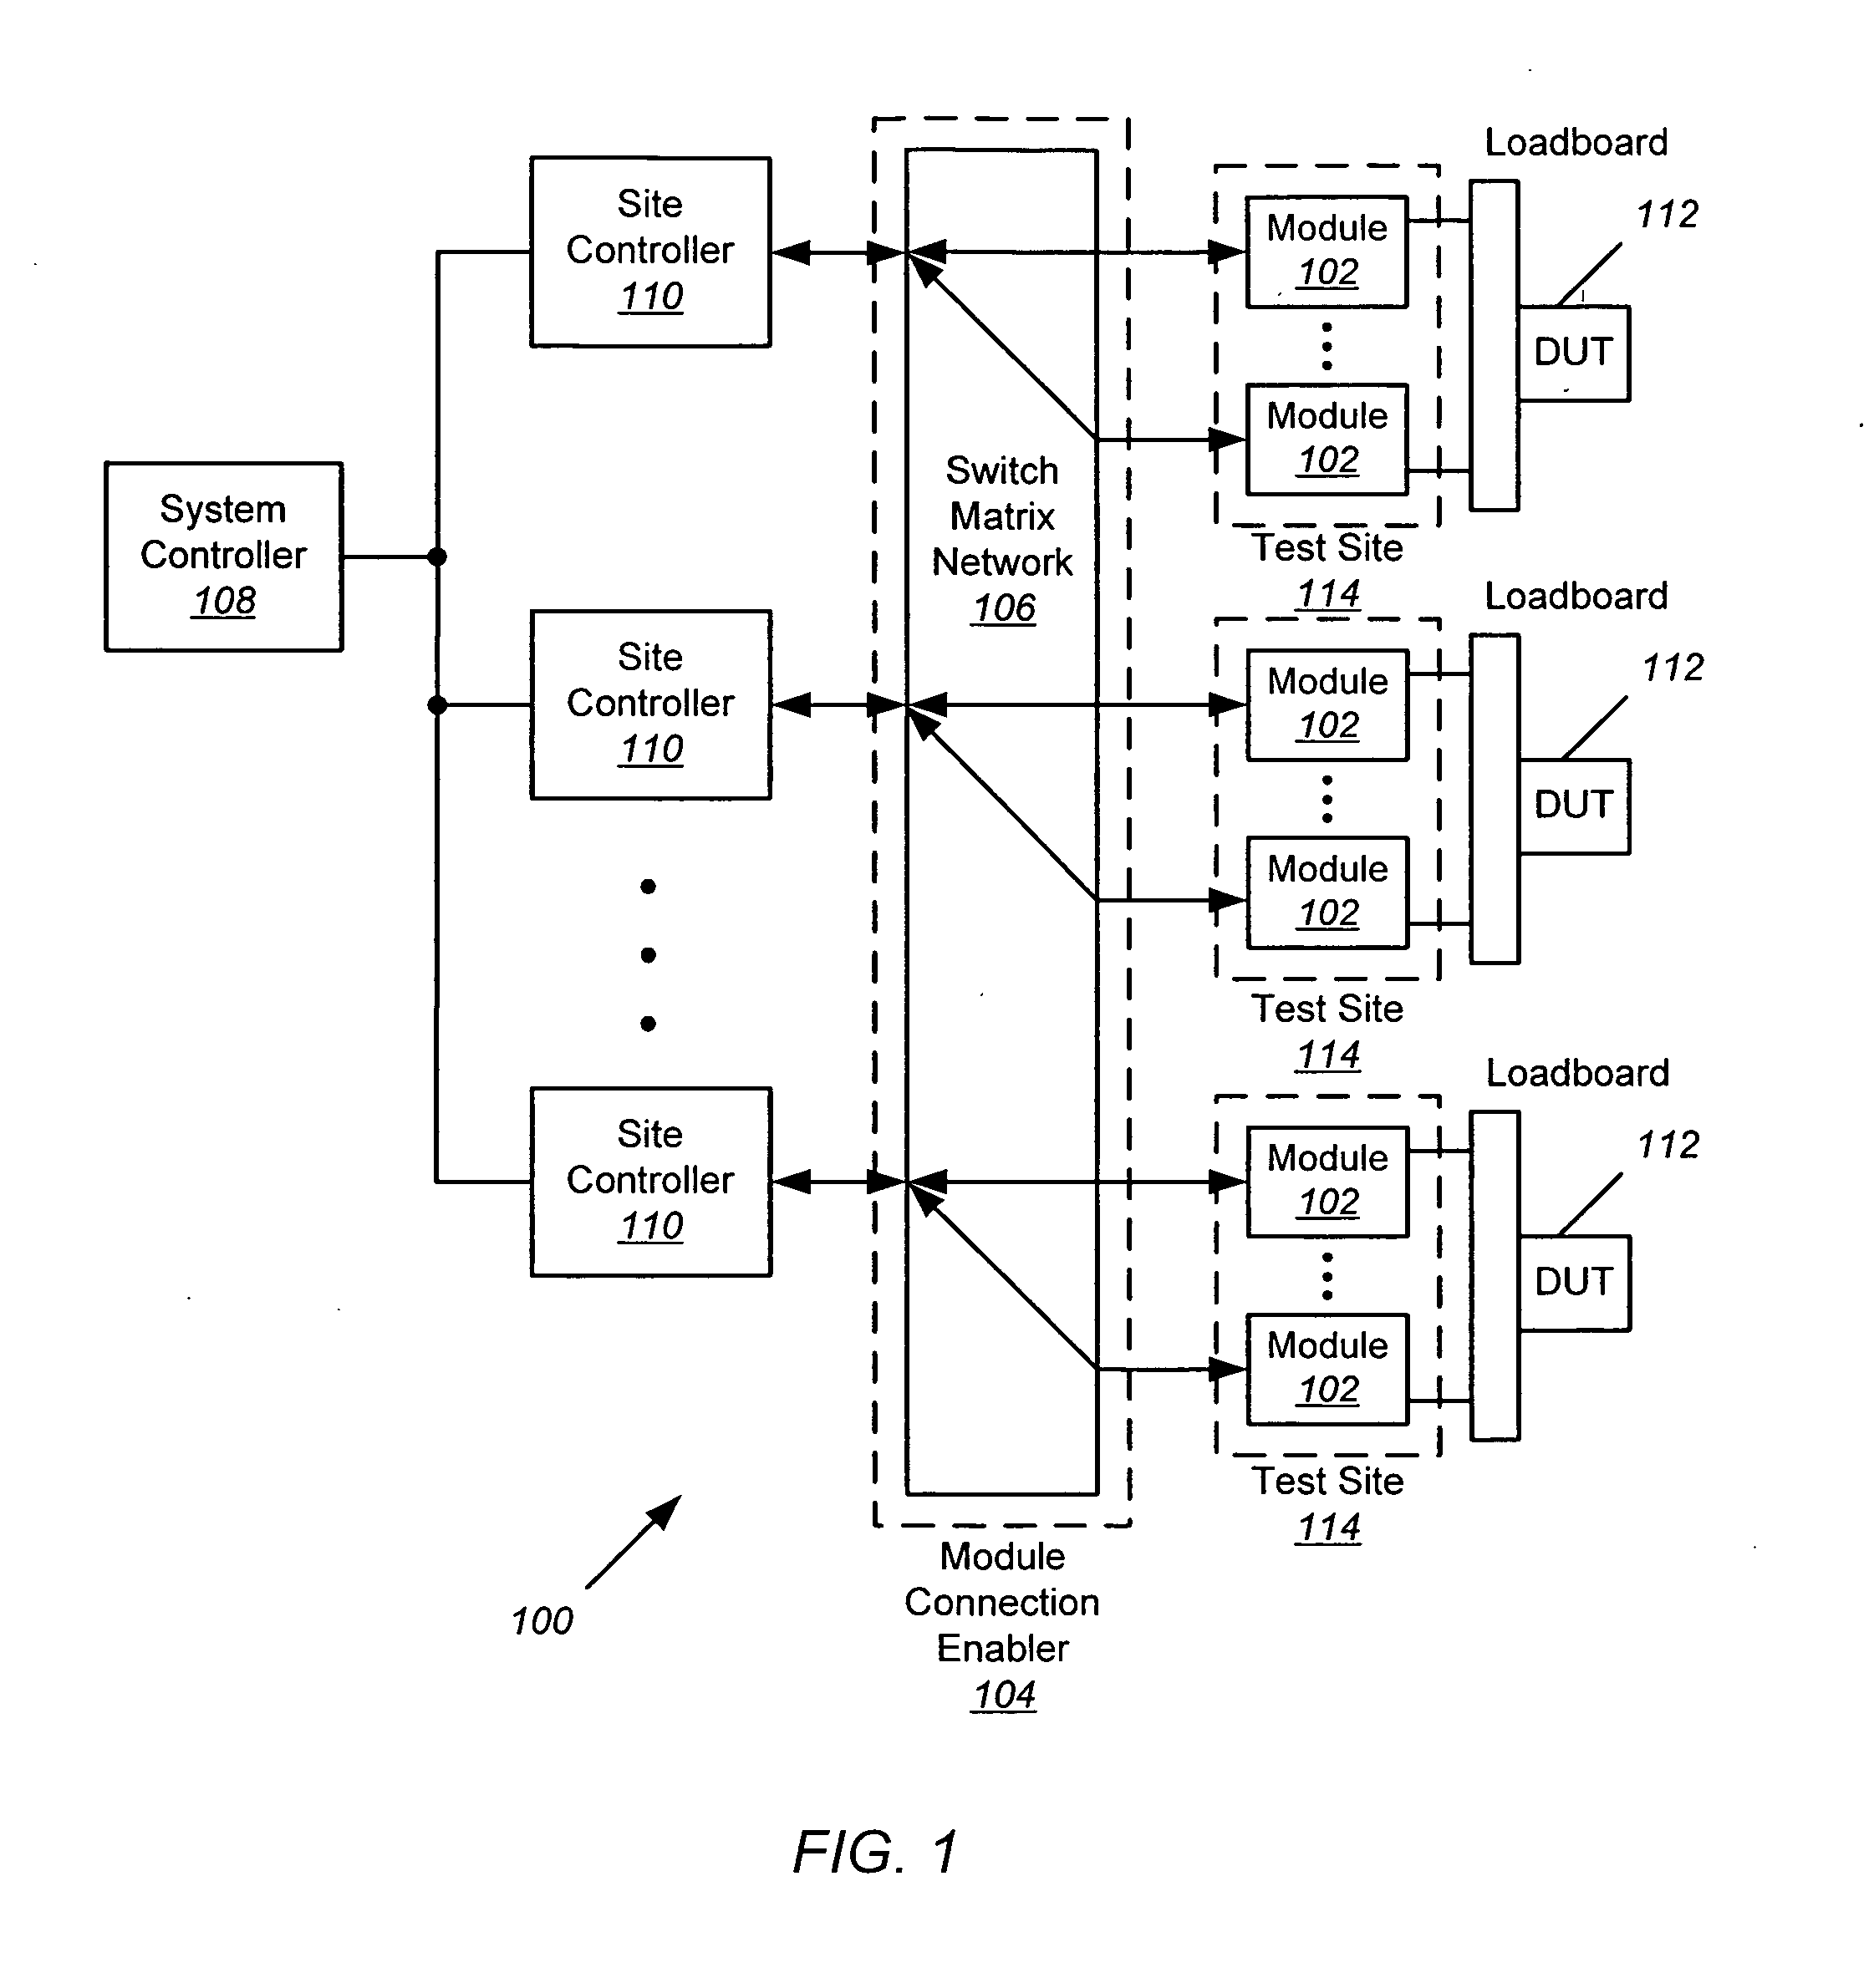 Synchronization of modules for analog and mixed signal testing in an open architecture test system